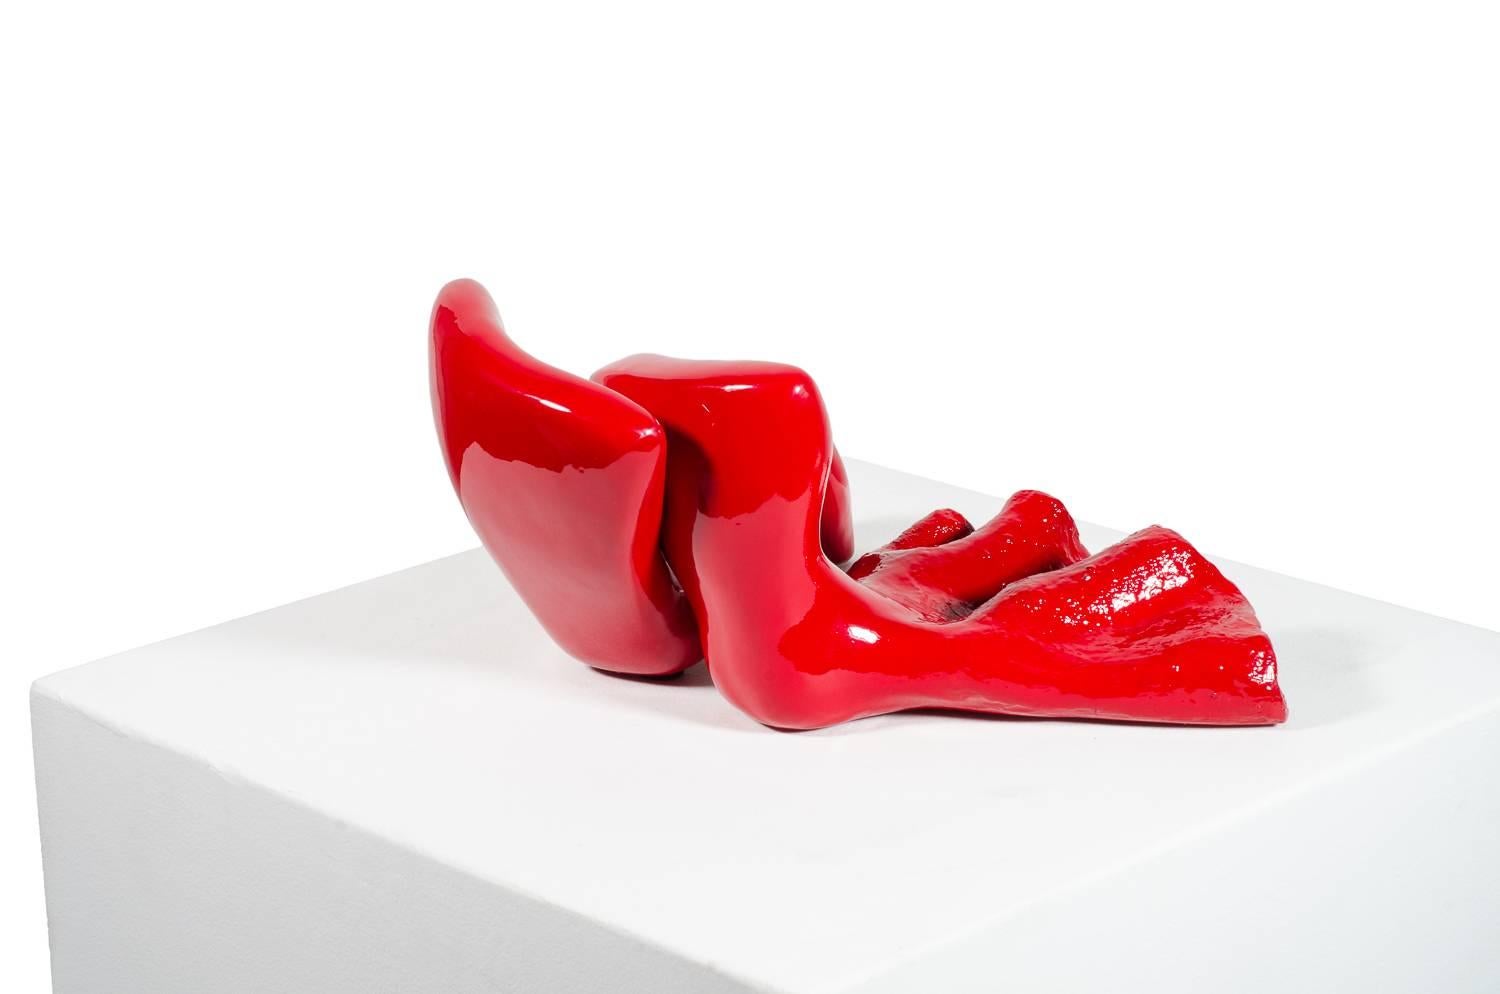 Couple (in red). The couple fell in love; then they lost their heads! - Gold Abstract Sculpture by Beatriz Gerenstein